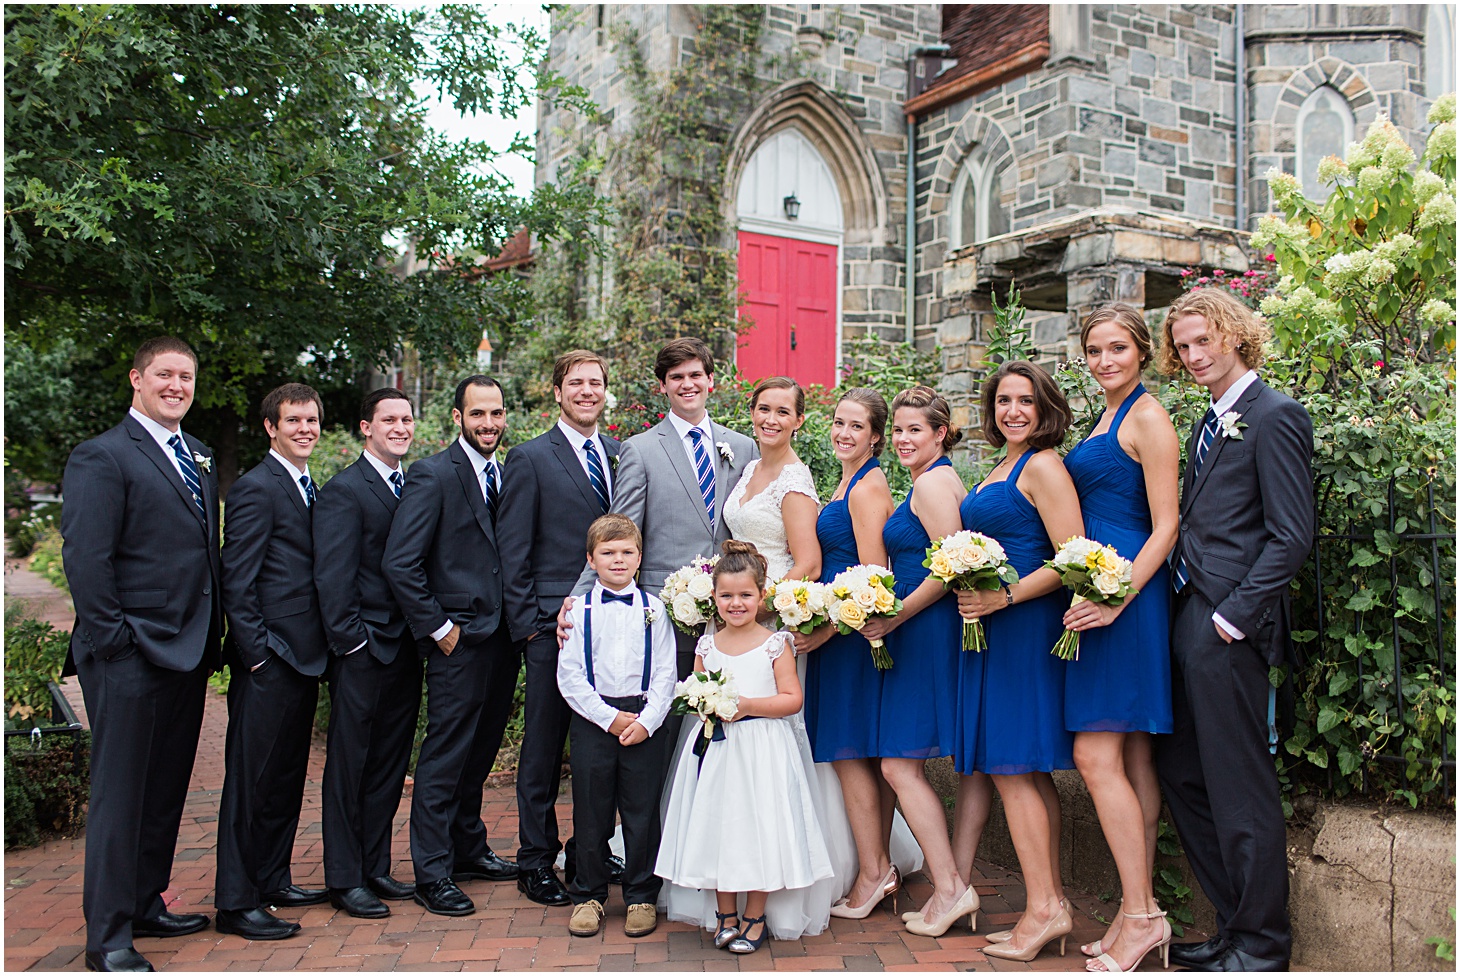 Georgetown Lutheran Church | Vintage-Inspired Dumbarton House Wedding in Georgetown by Sarah Bradshaw Photography